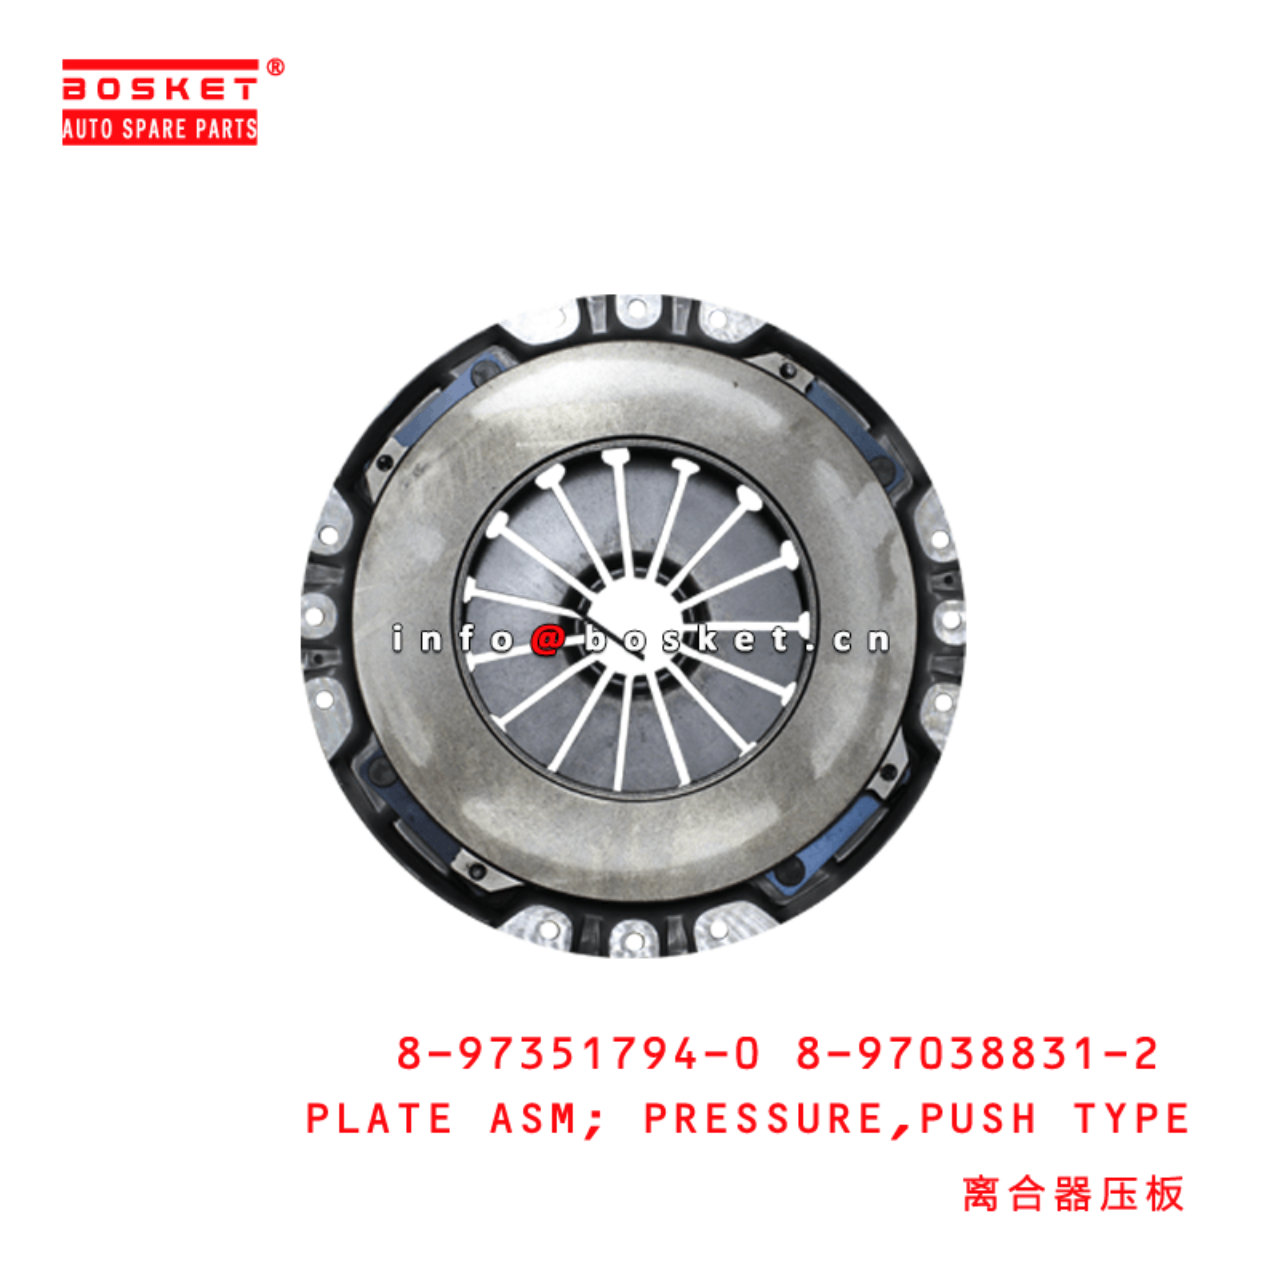 8-97351794-0 8-97038831-2 Push Type Pressure Plate Assembly 8973517940 8970388312 Suitable for ISUZU